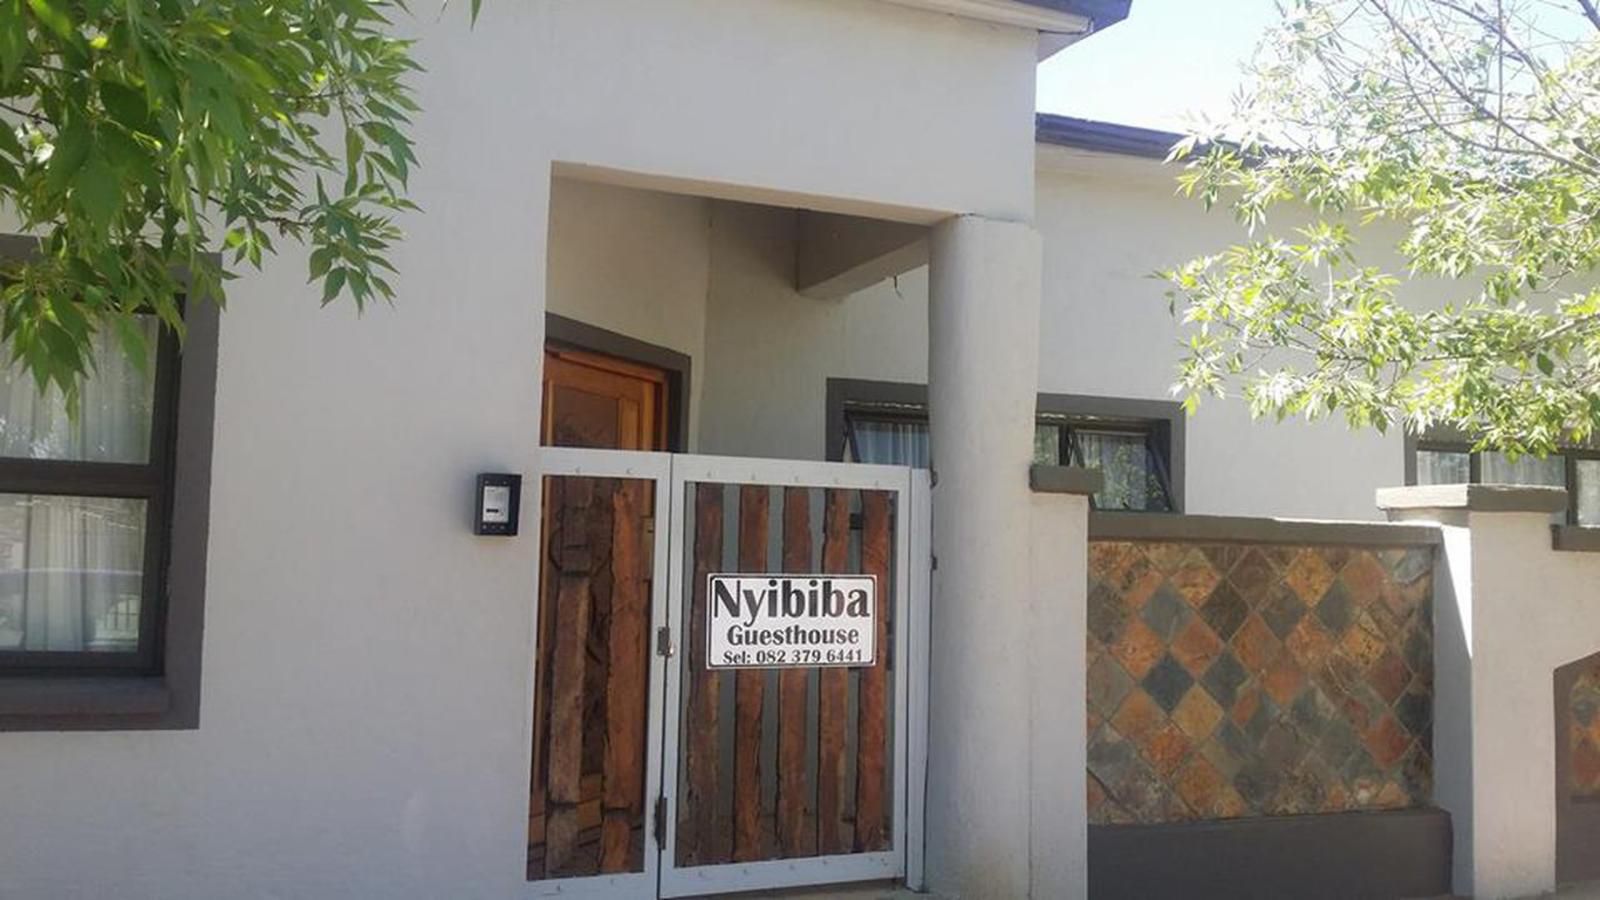 Nyibiba Guesthouse De Aar Northern Cape South Africa Sign